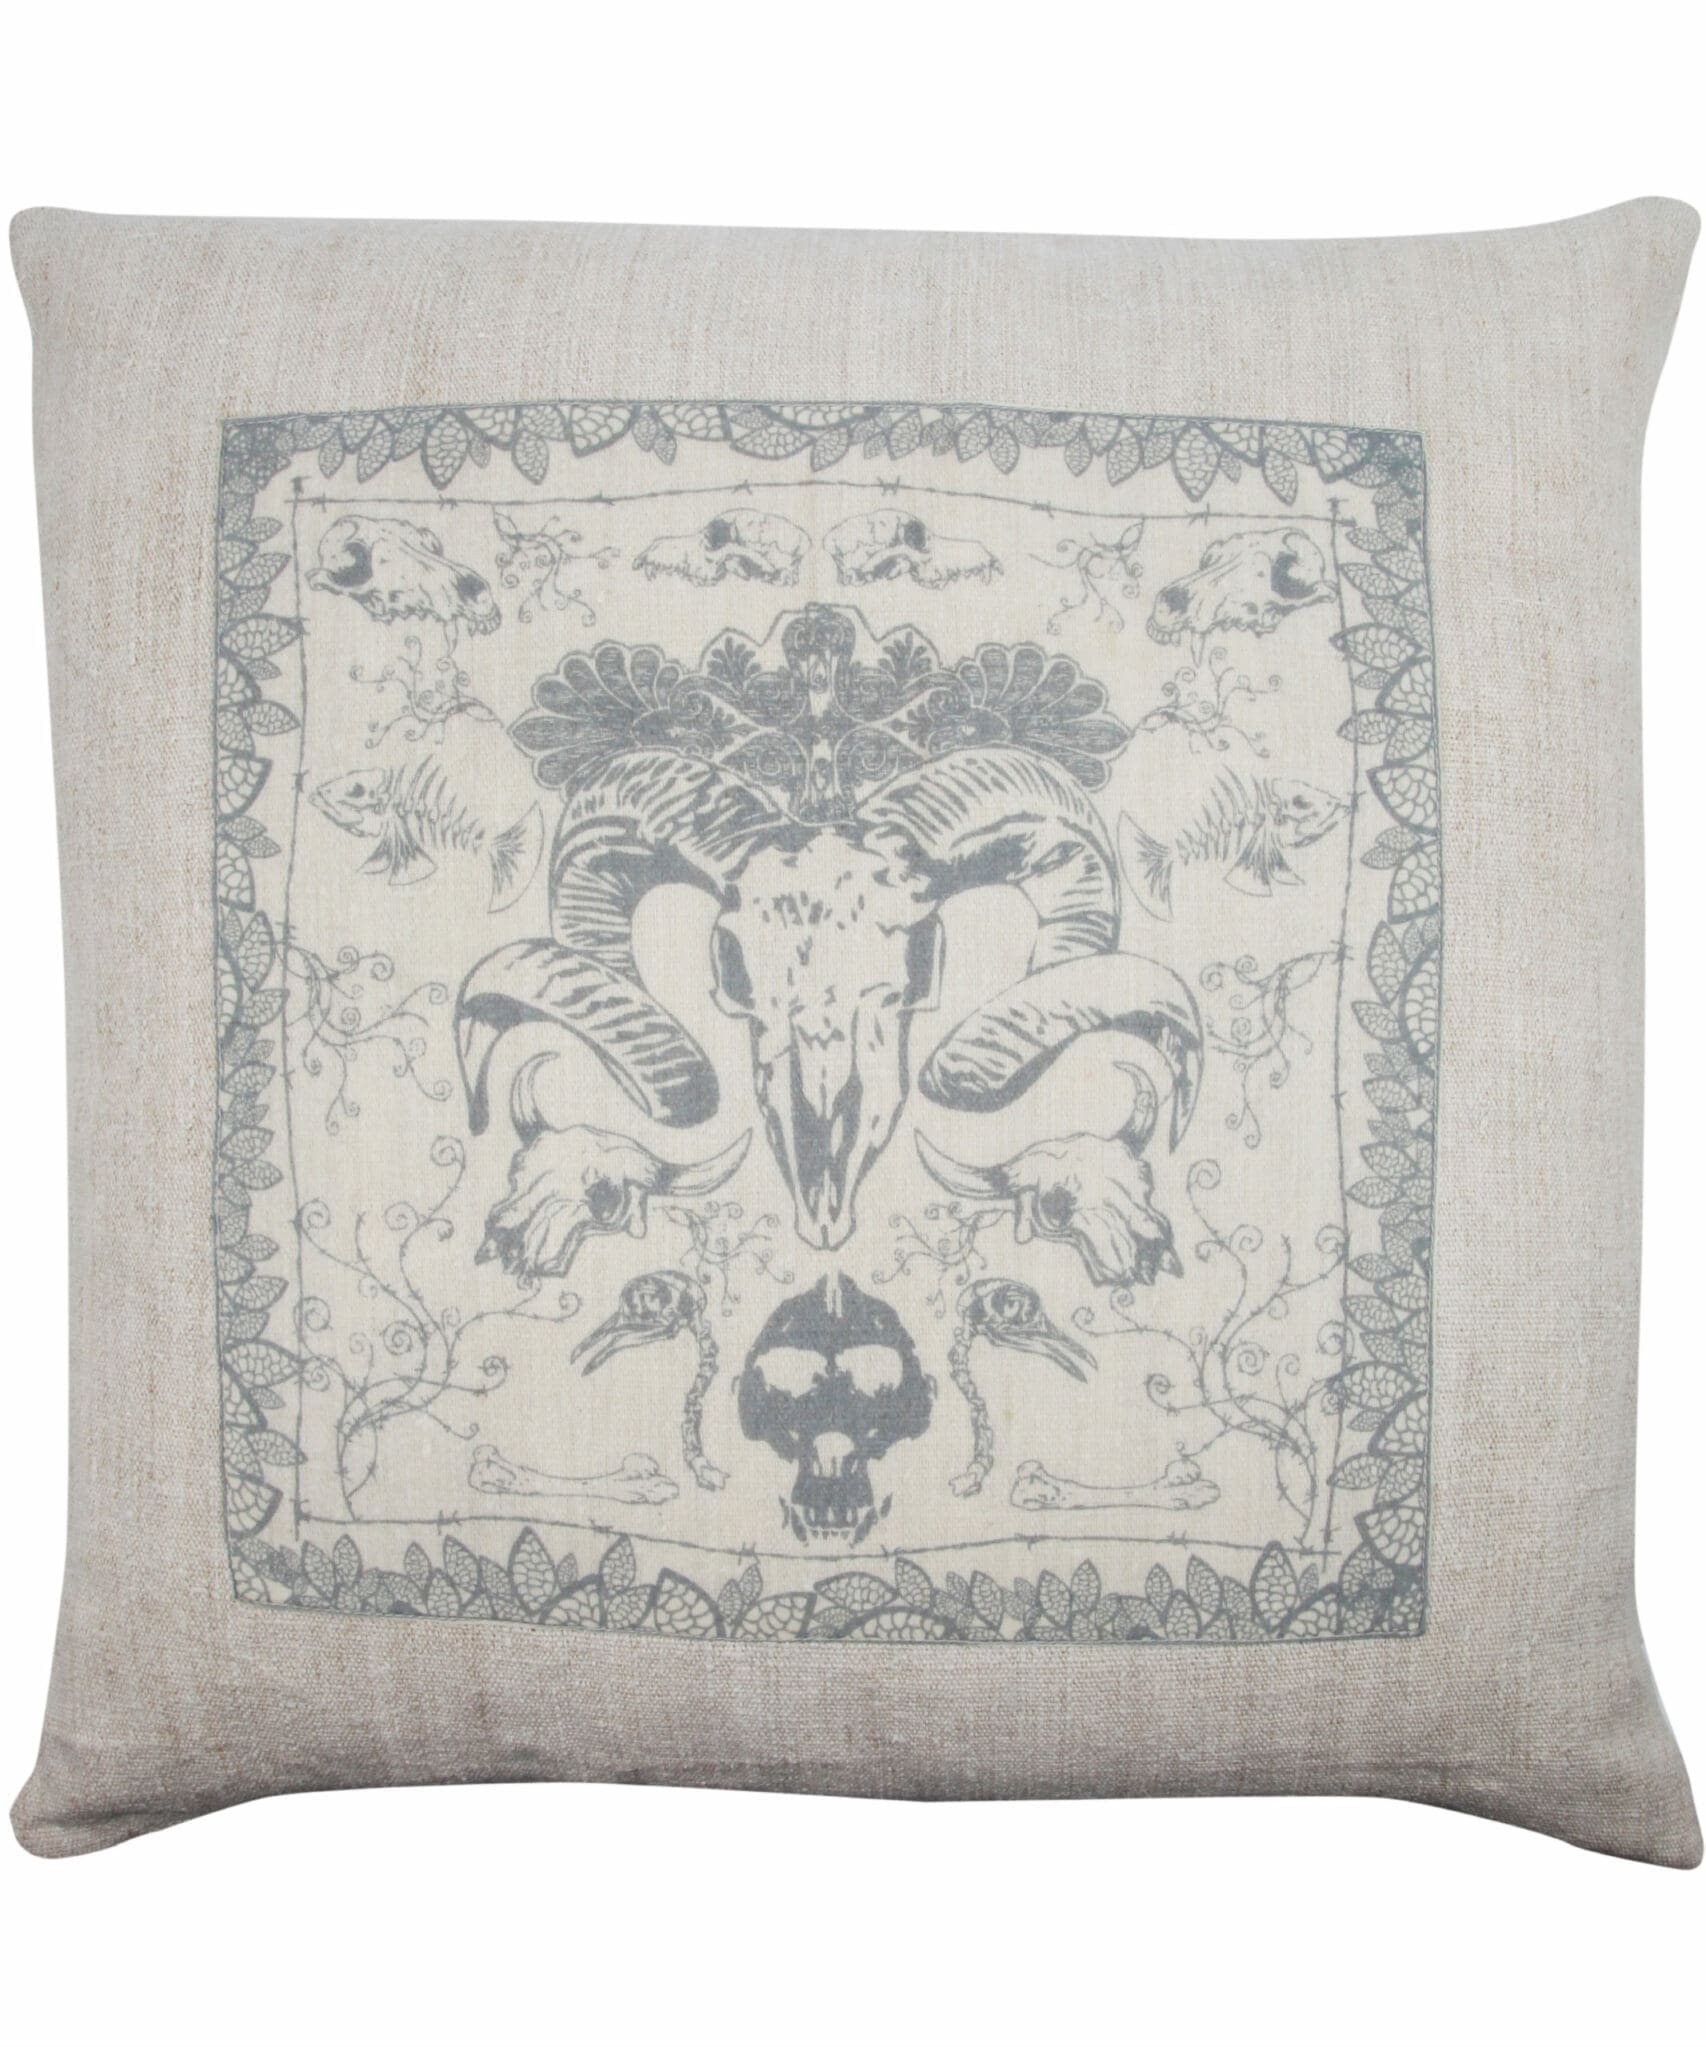 Jo Wood for Liberty -Endangered Species cushion